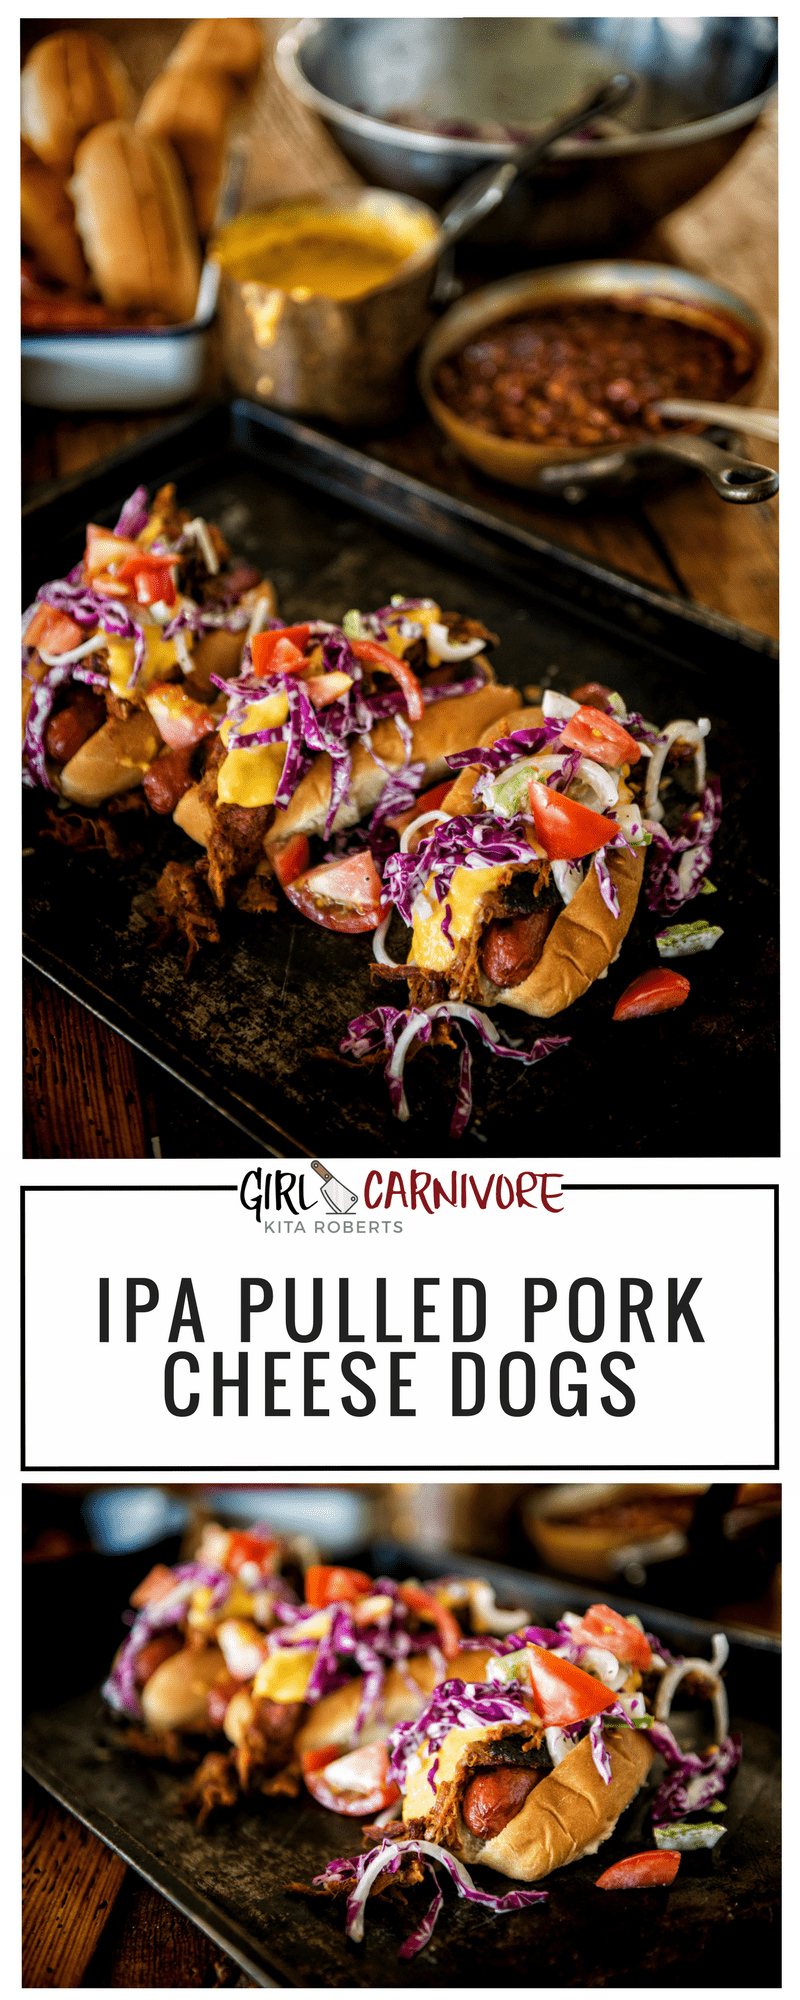 IPA Pulled Pork Cheese Dogs Recipe at GirlCarnivore.com